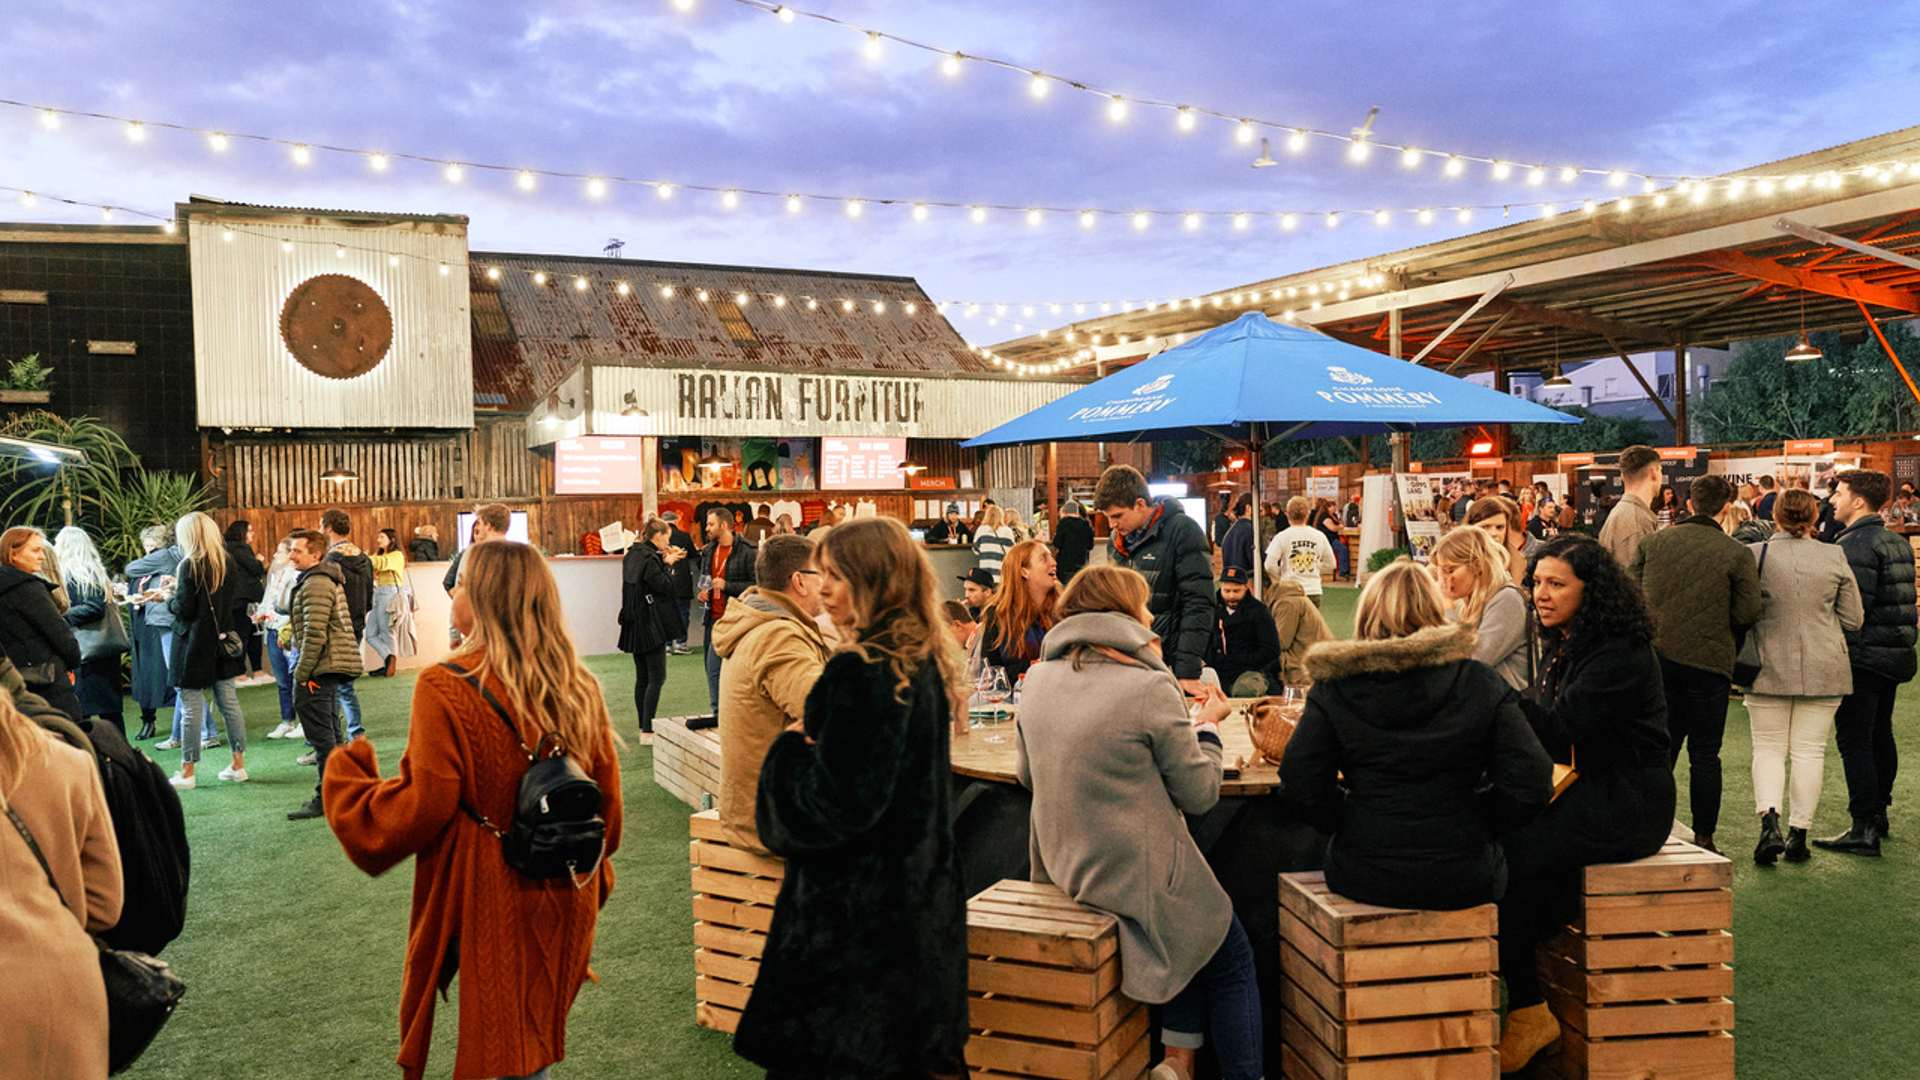 Picolo Is Australia's First Major Low- and No-Booze Drinks Festival Hitting Melbourne in February